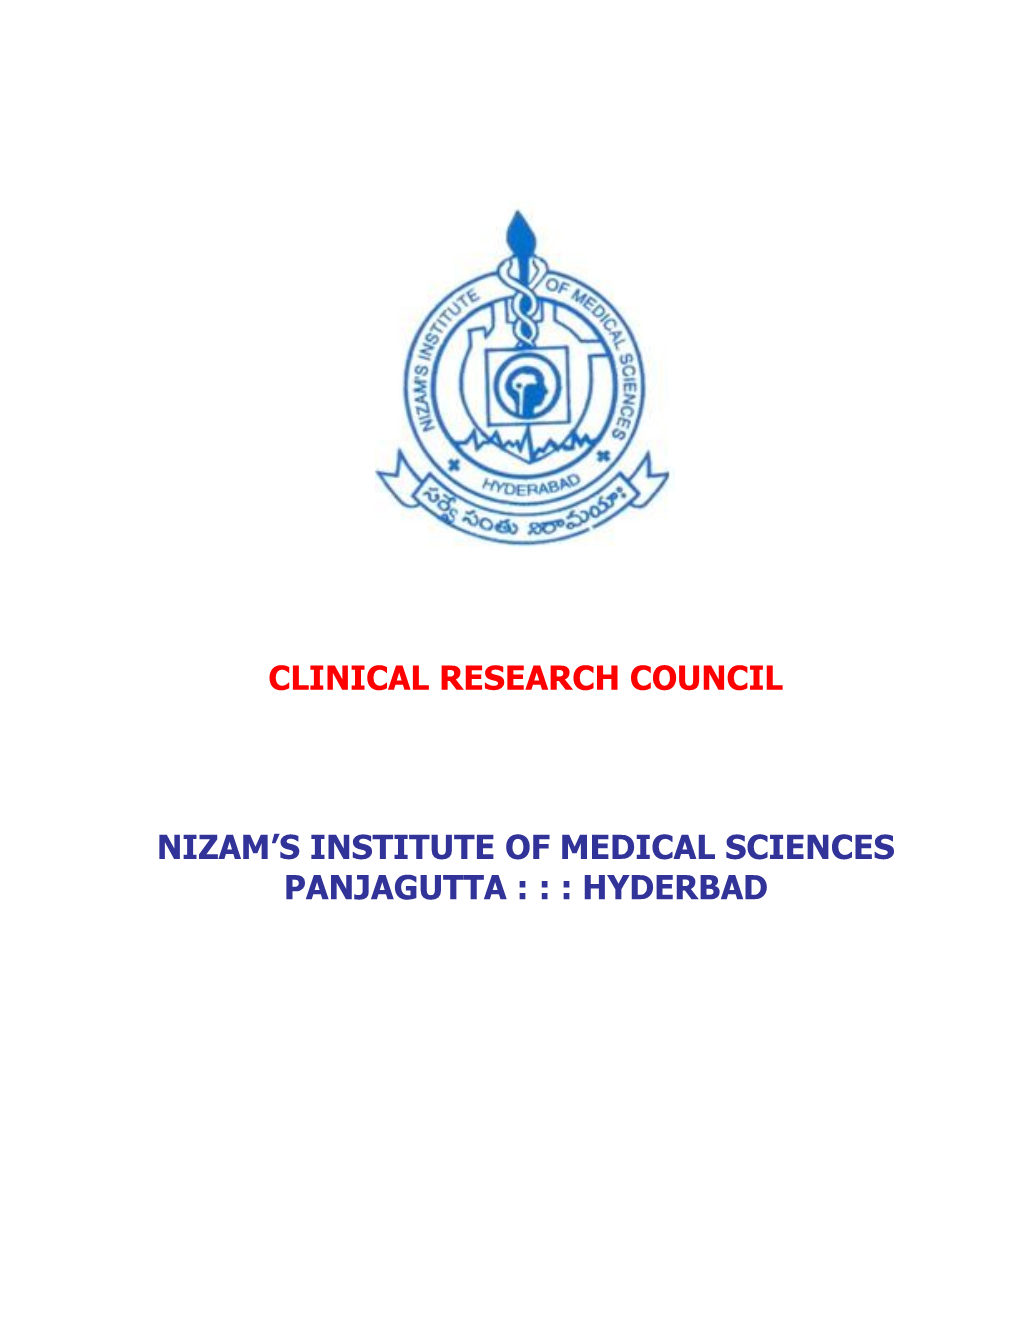 Clinical Research Council